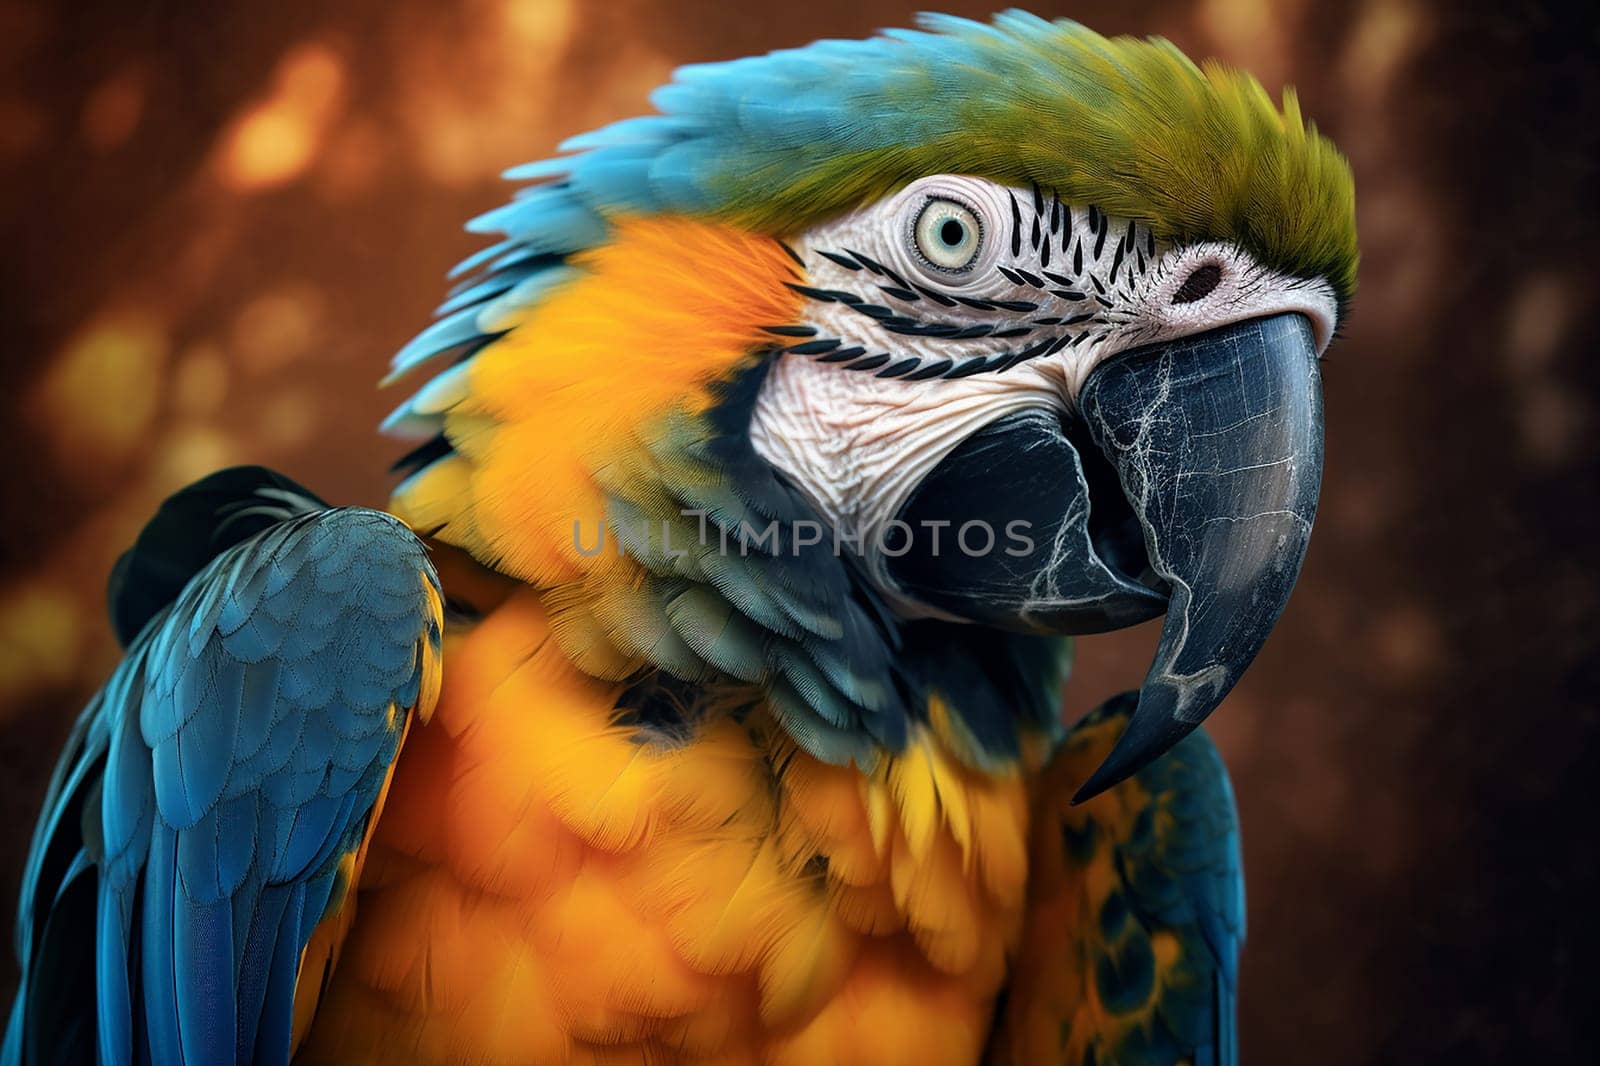 Vibrant colored macaw with intricate feather details by Hype2art